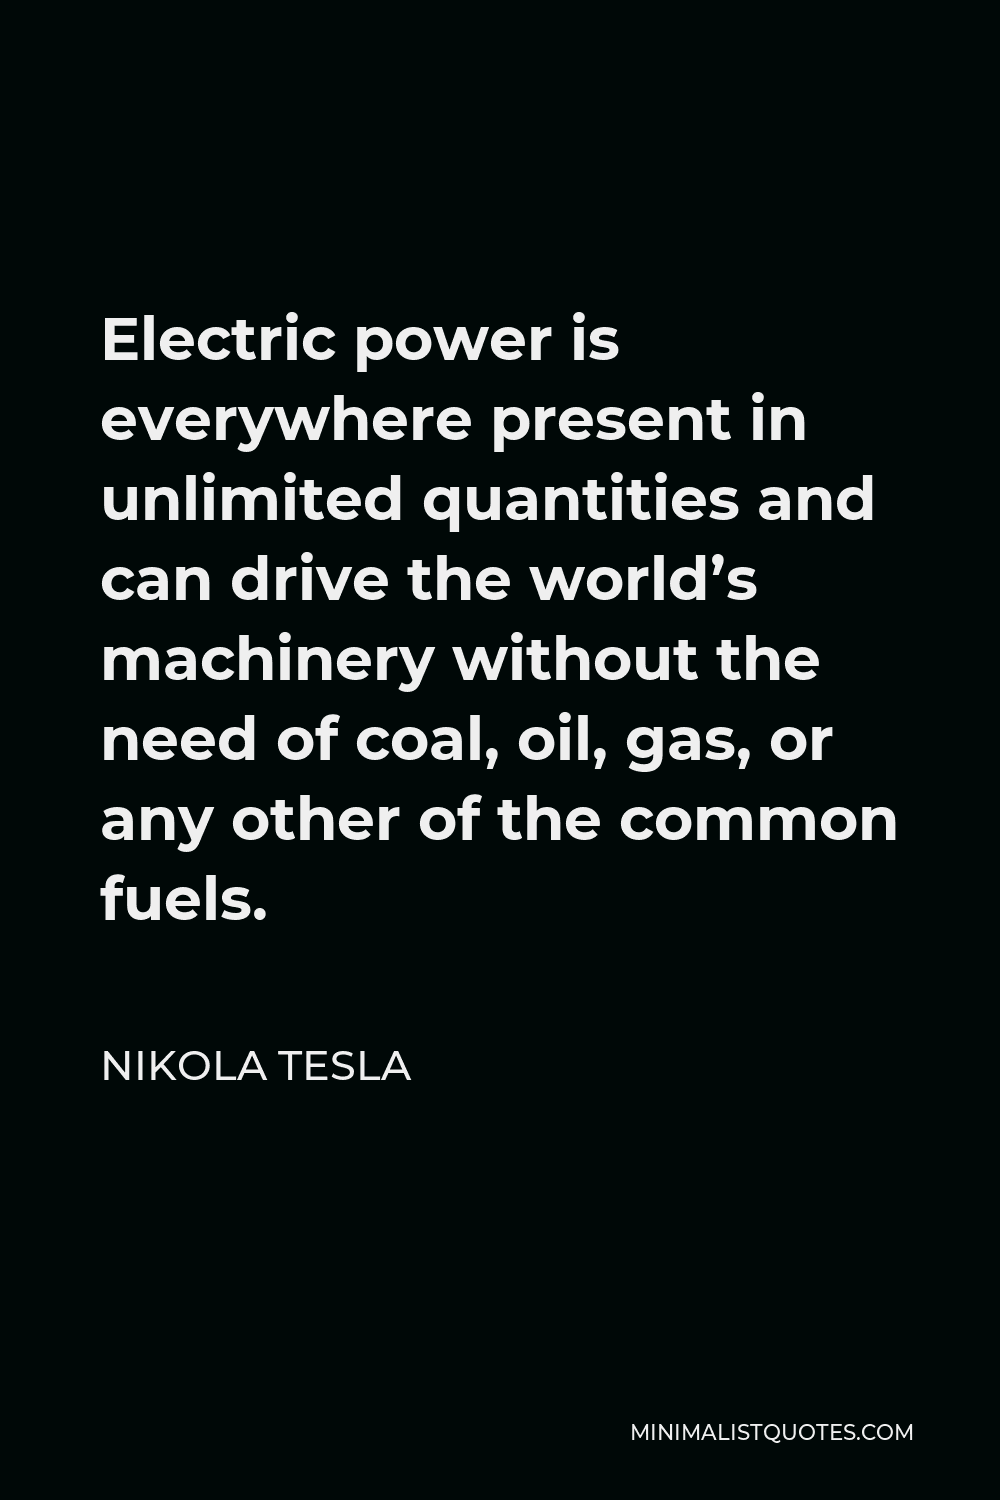 Electric power is everywhere present in unlimited